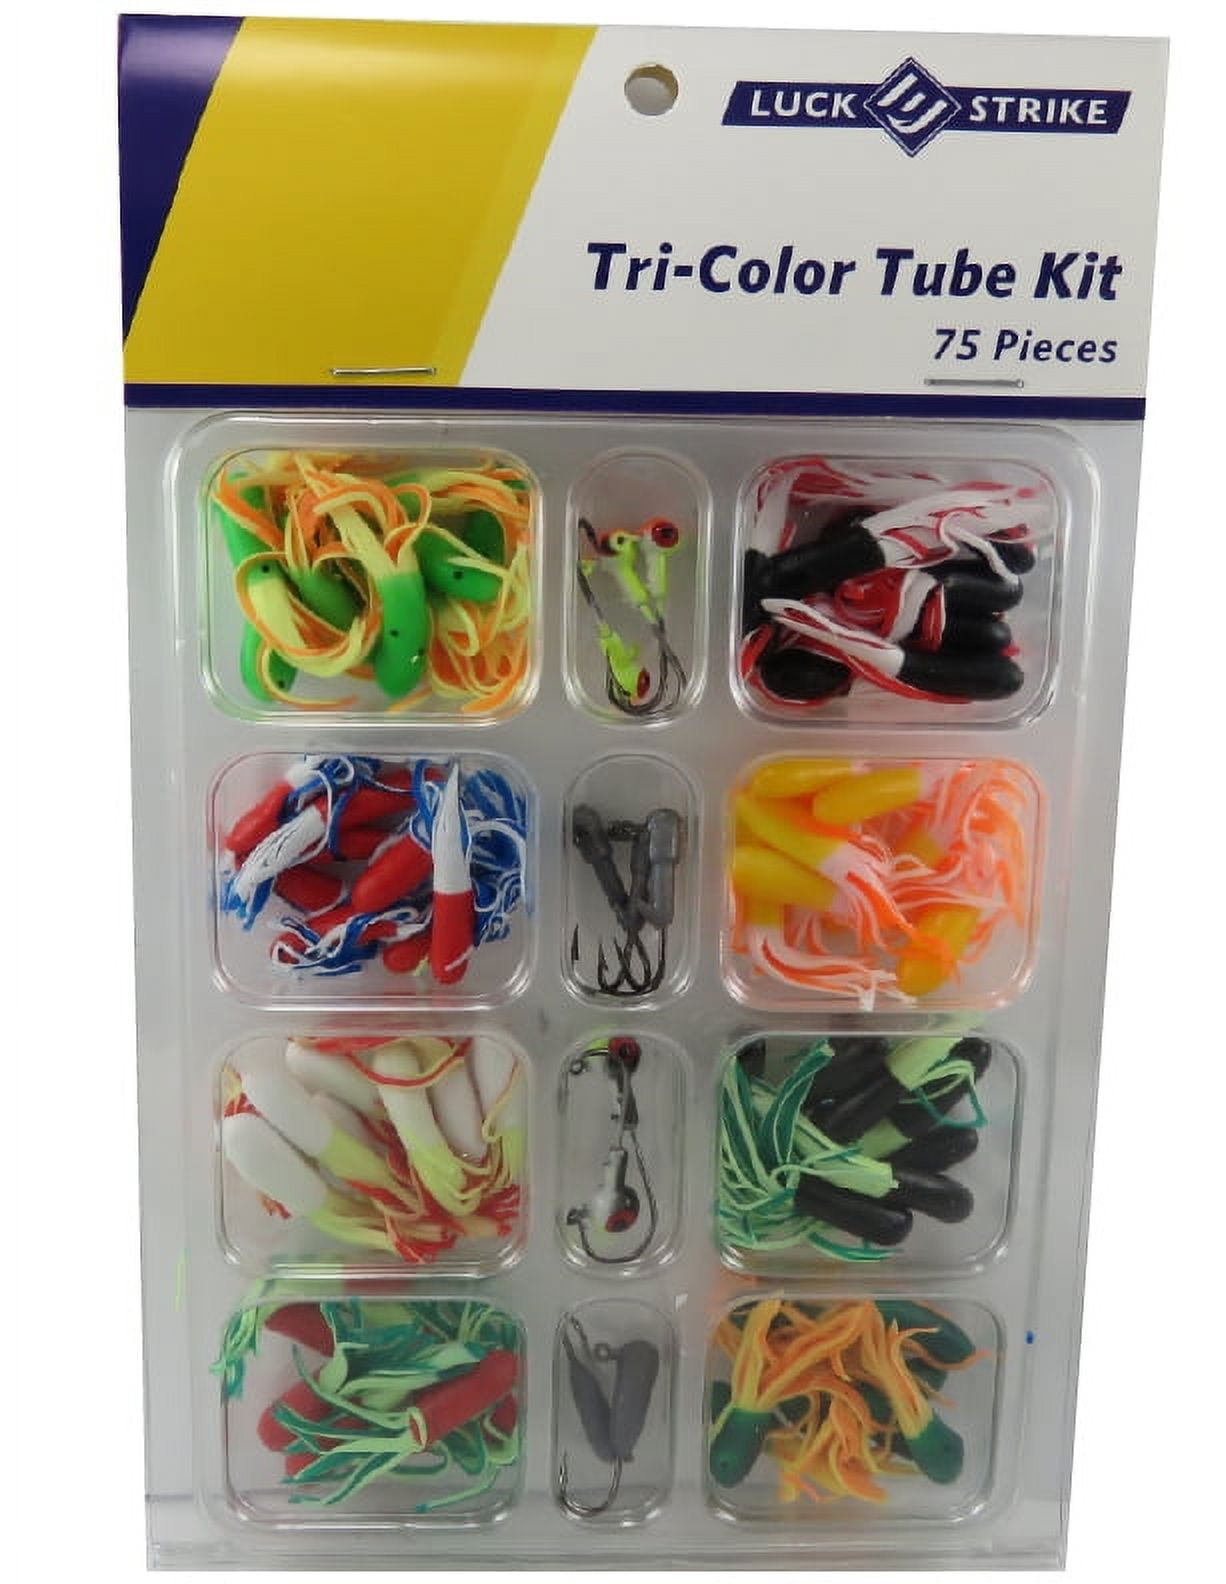 Luck-e-strike, Tri Color Tube Kit, Assorted Colors, 75 Piece, Crappie Baits